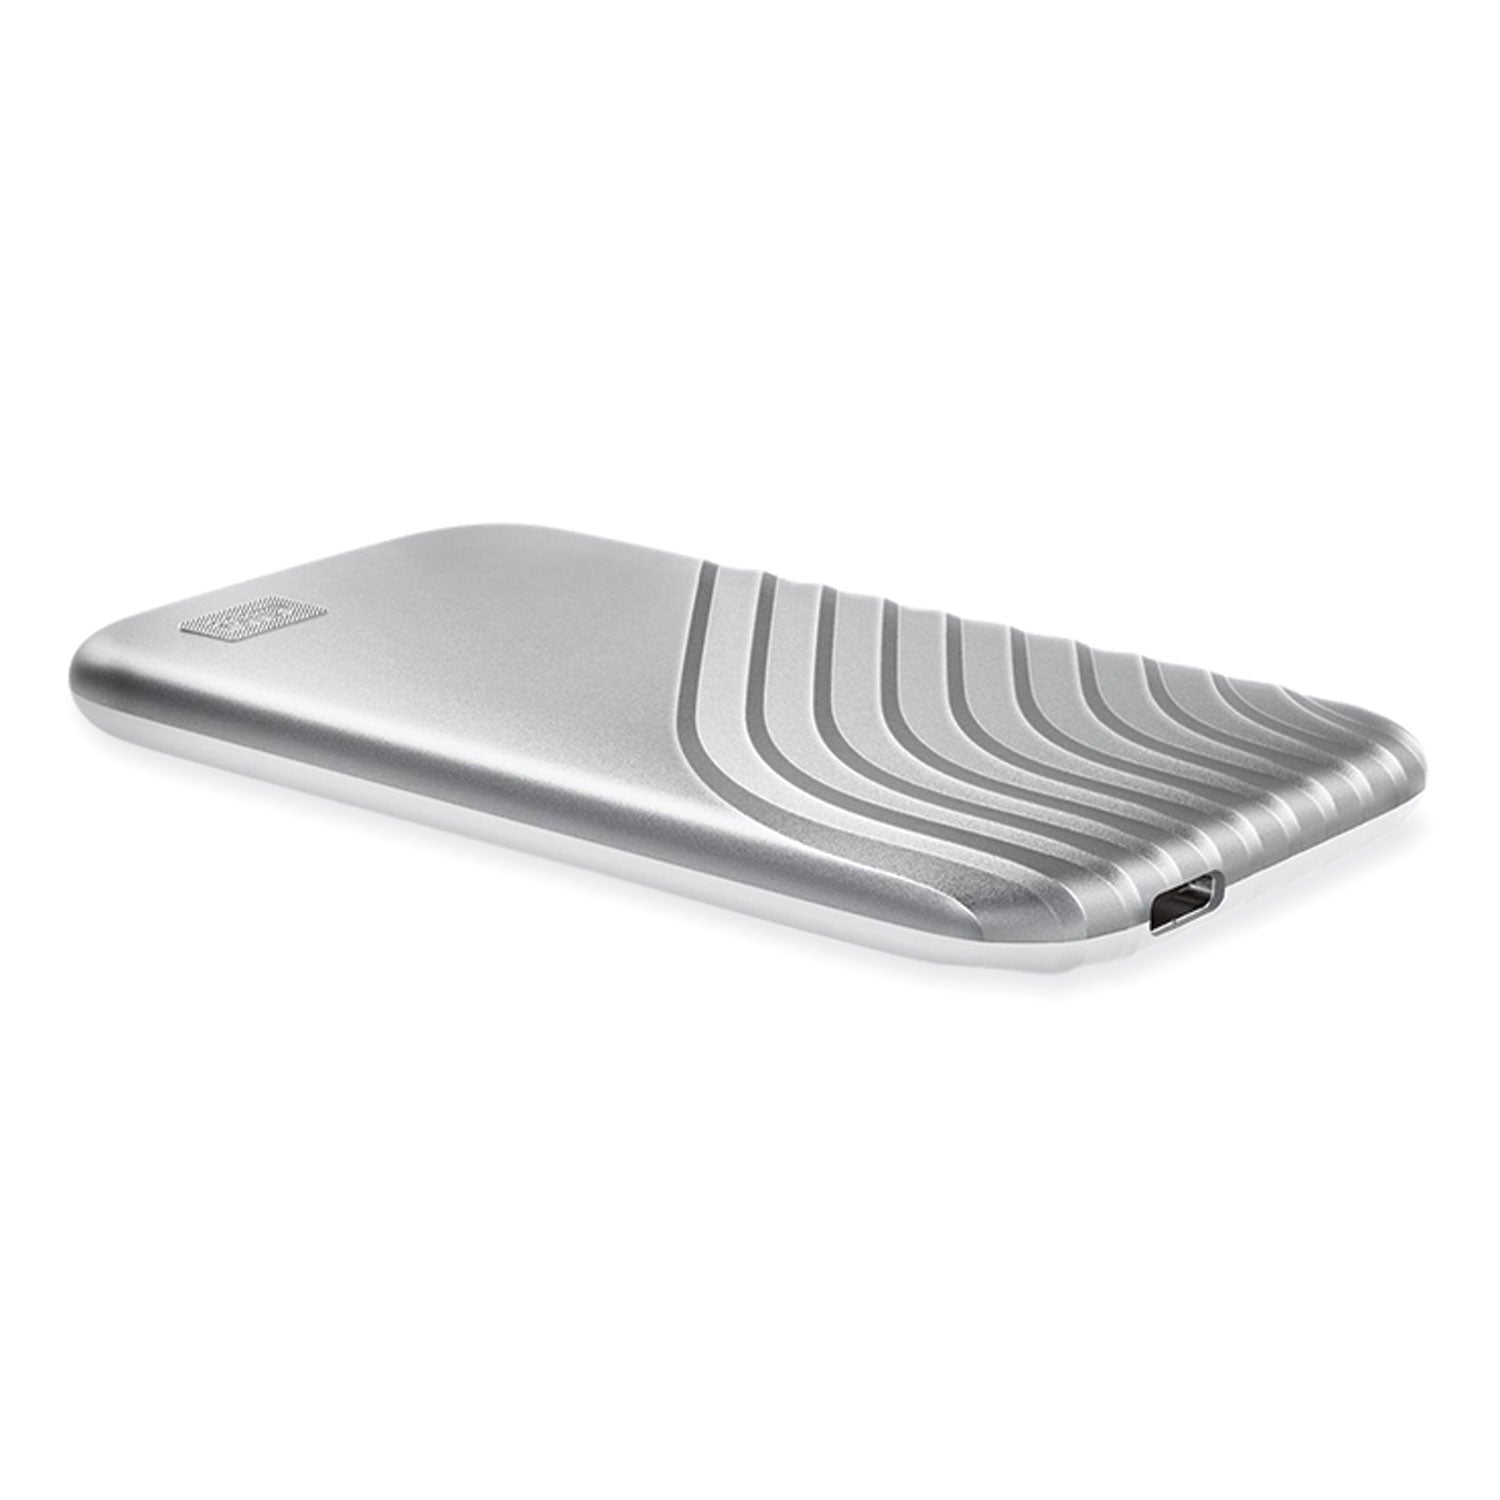 my-passport-external-solid-state-drive-1-tb-usb-32-silver_wdcagf0010bsl - 4